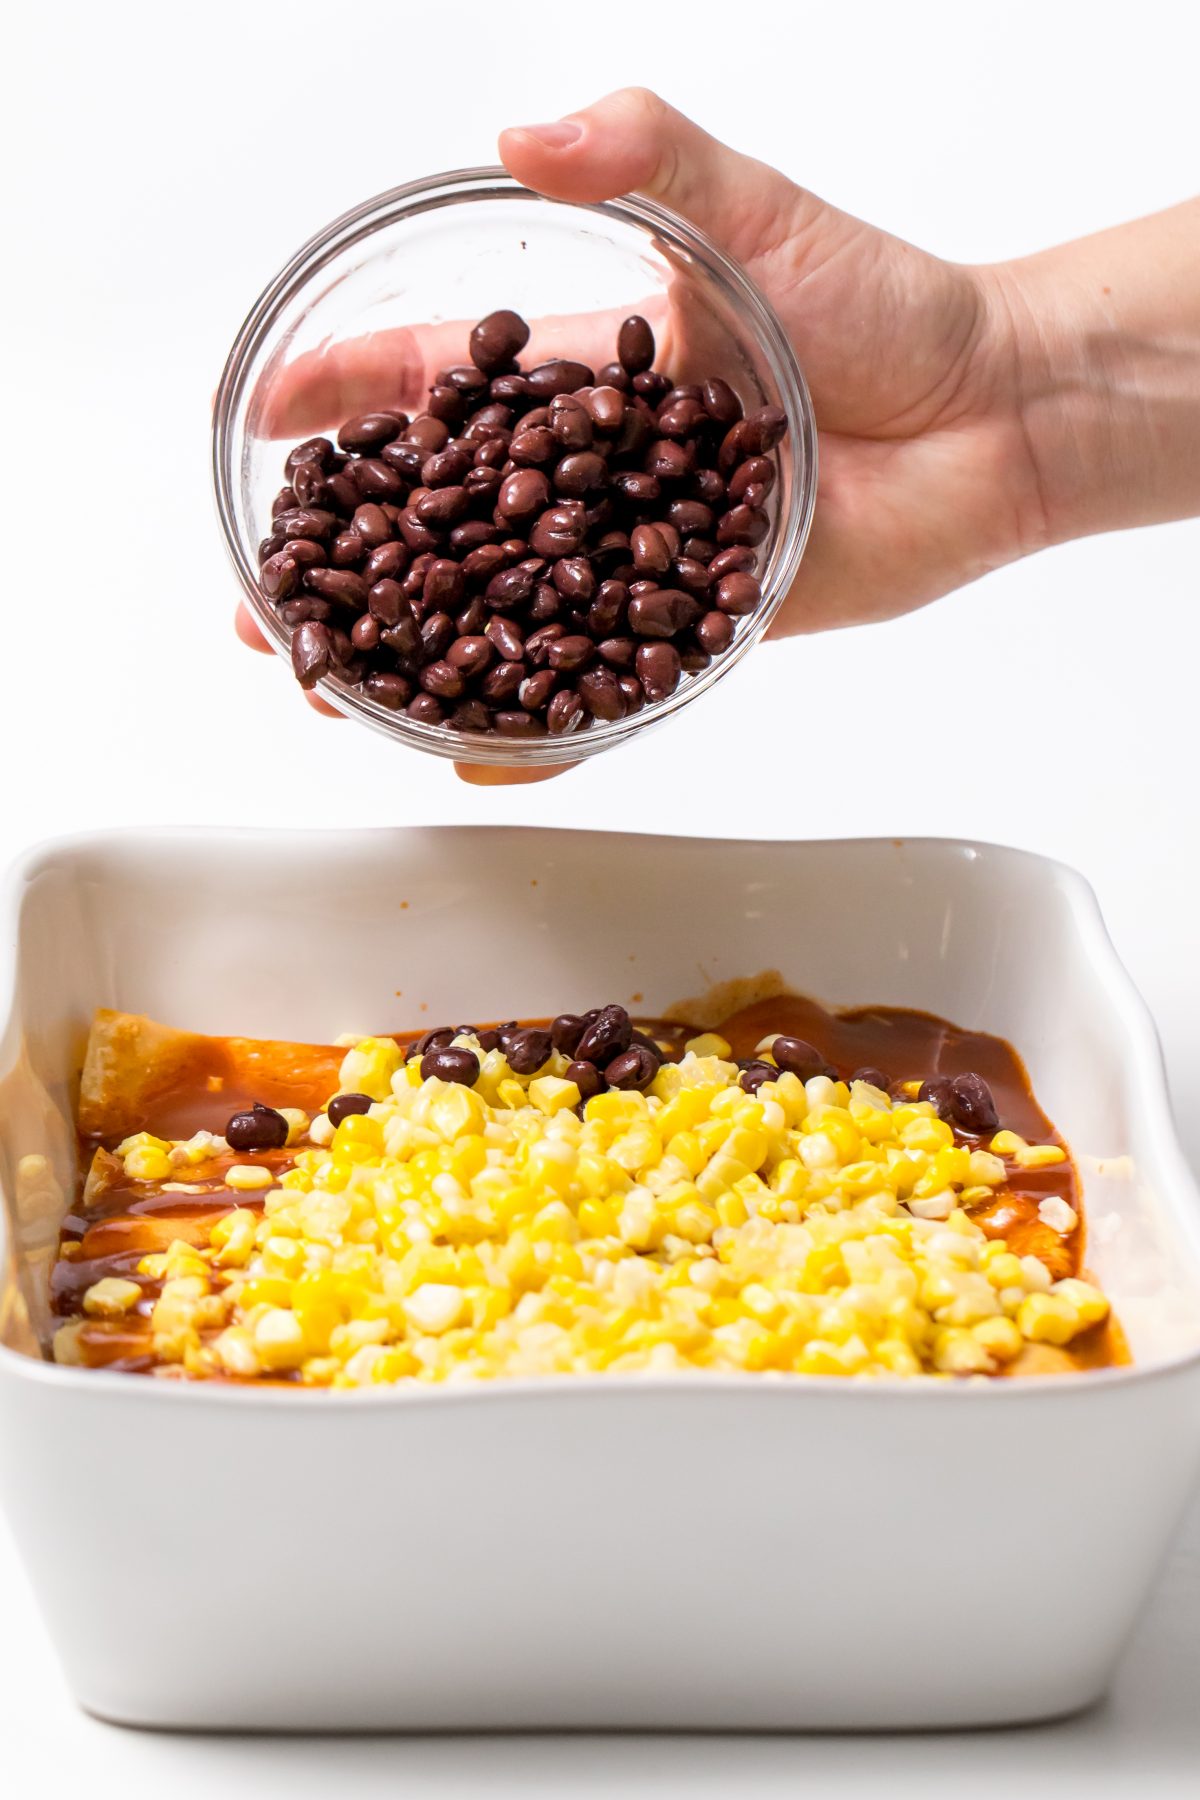 Load up the enchiladas with corn, black beans, and cheese